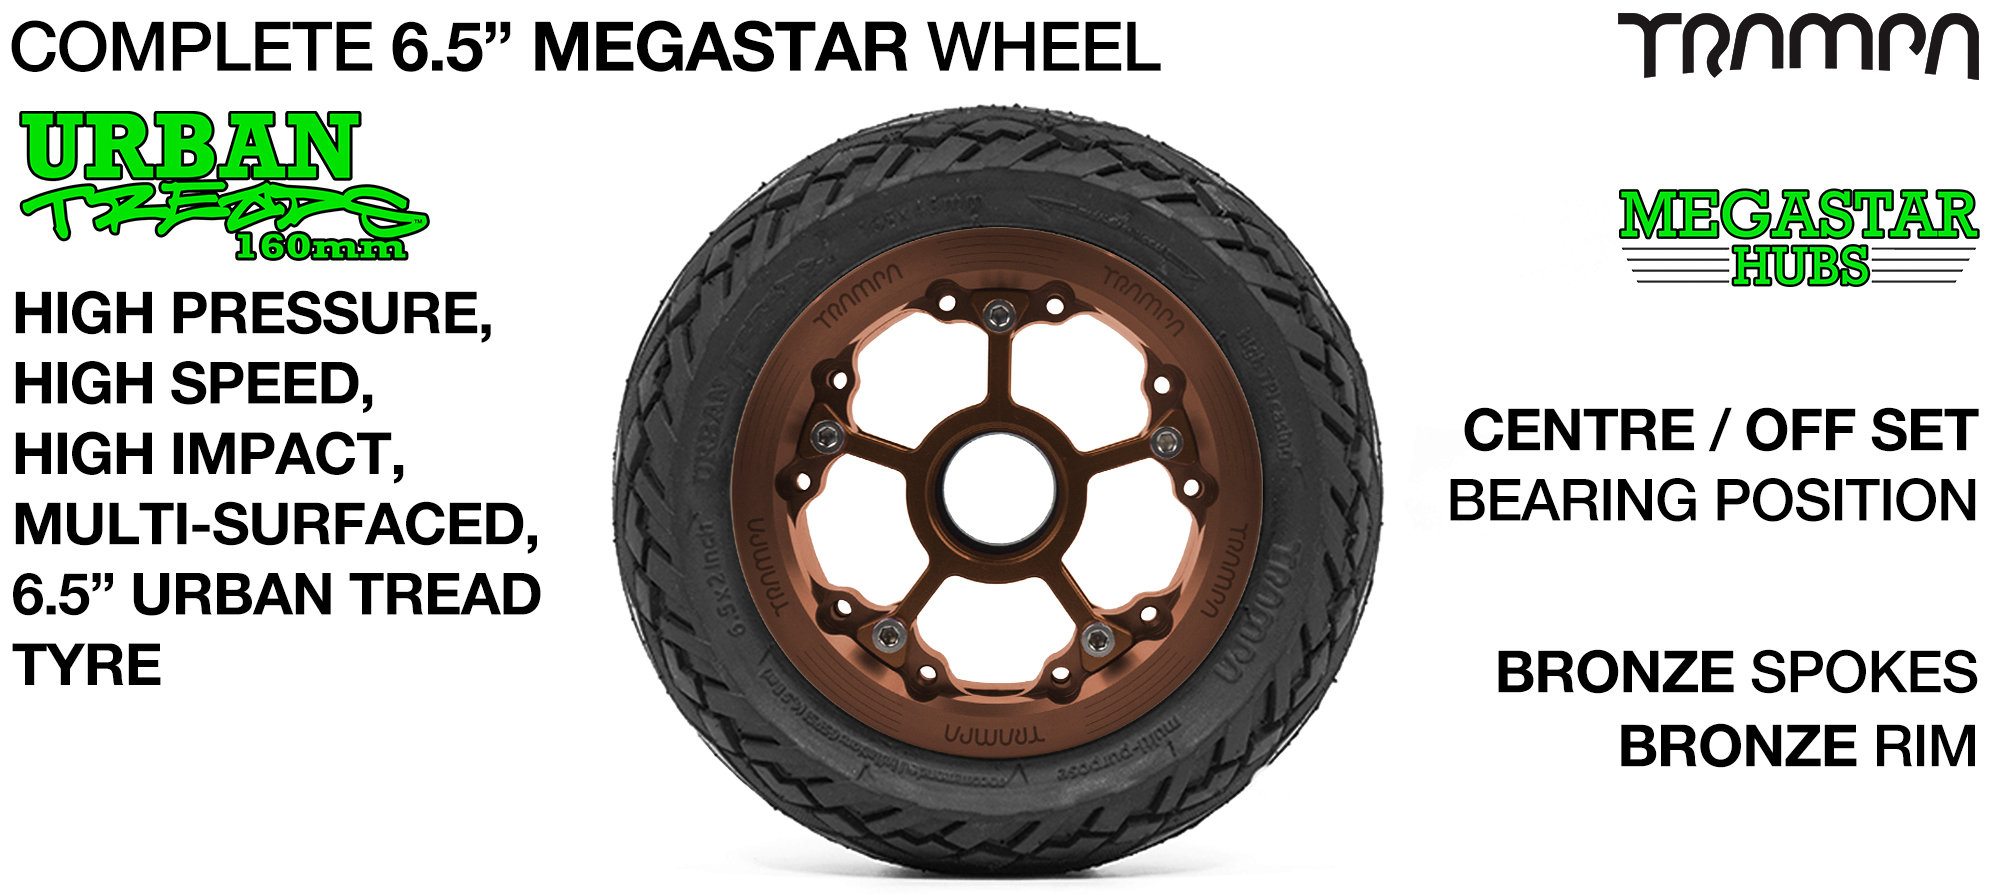 CENTER-SET MEGASTAR 8 Hub with BRONZE Rims & BRONZE Spokes with the amazing Low Profile 6.5 Inch URBAN Treads Tyres